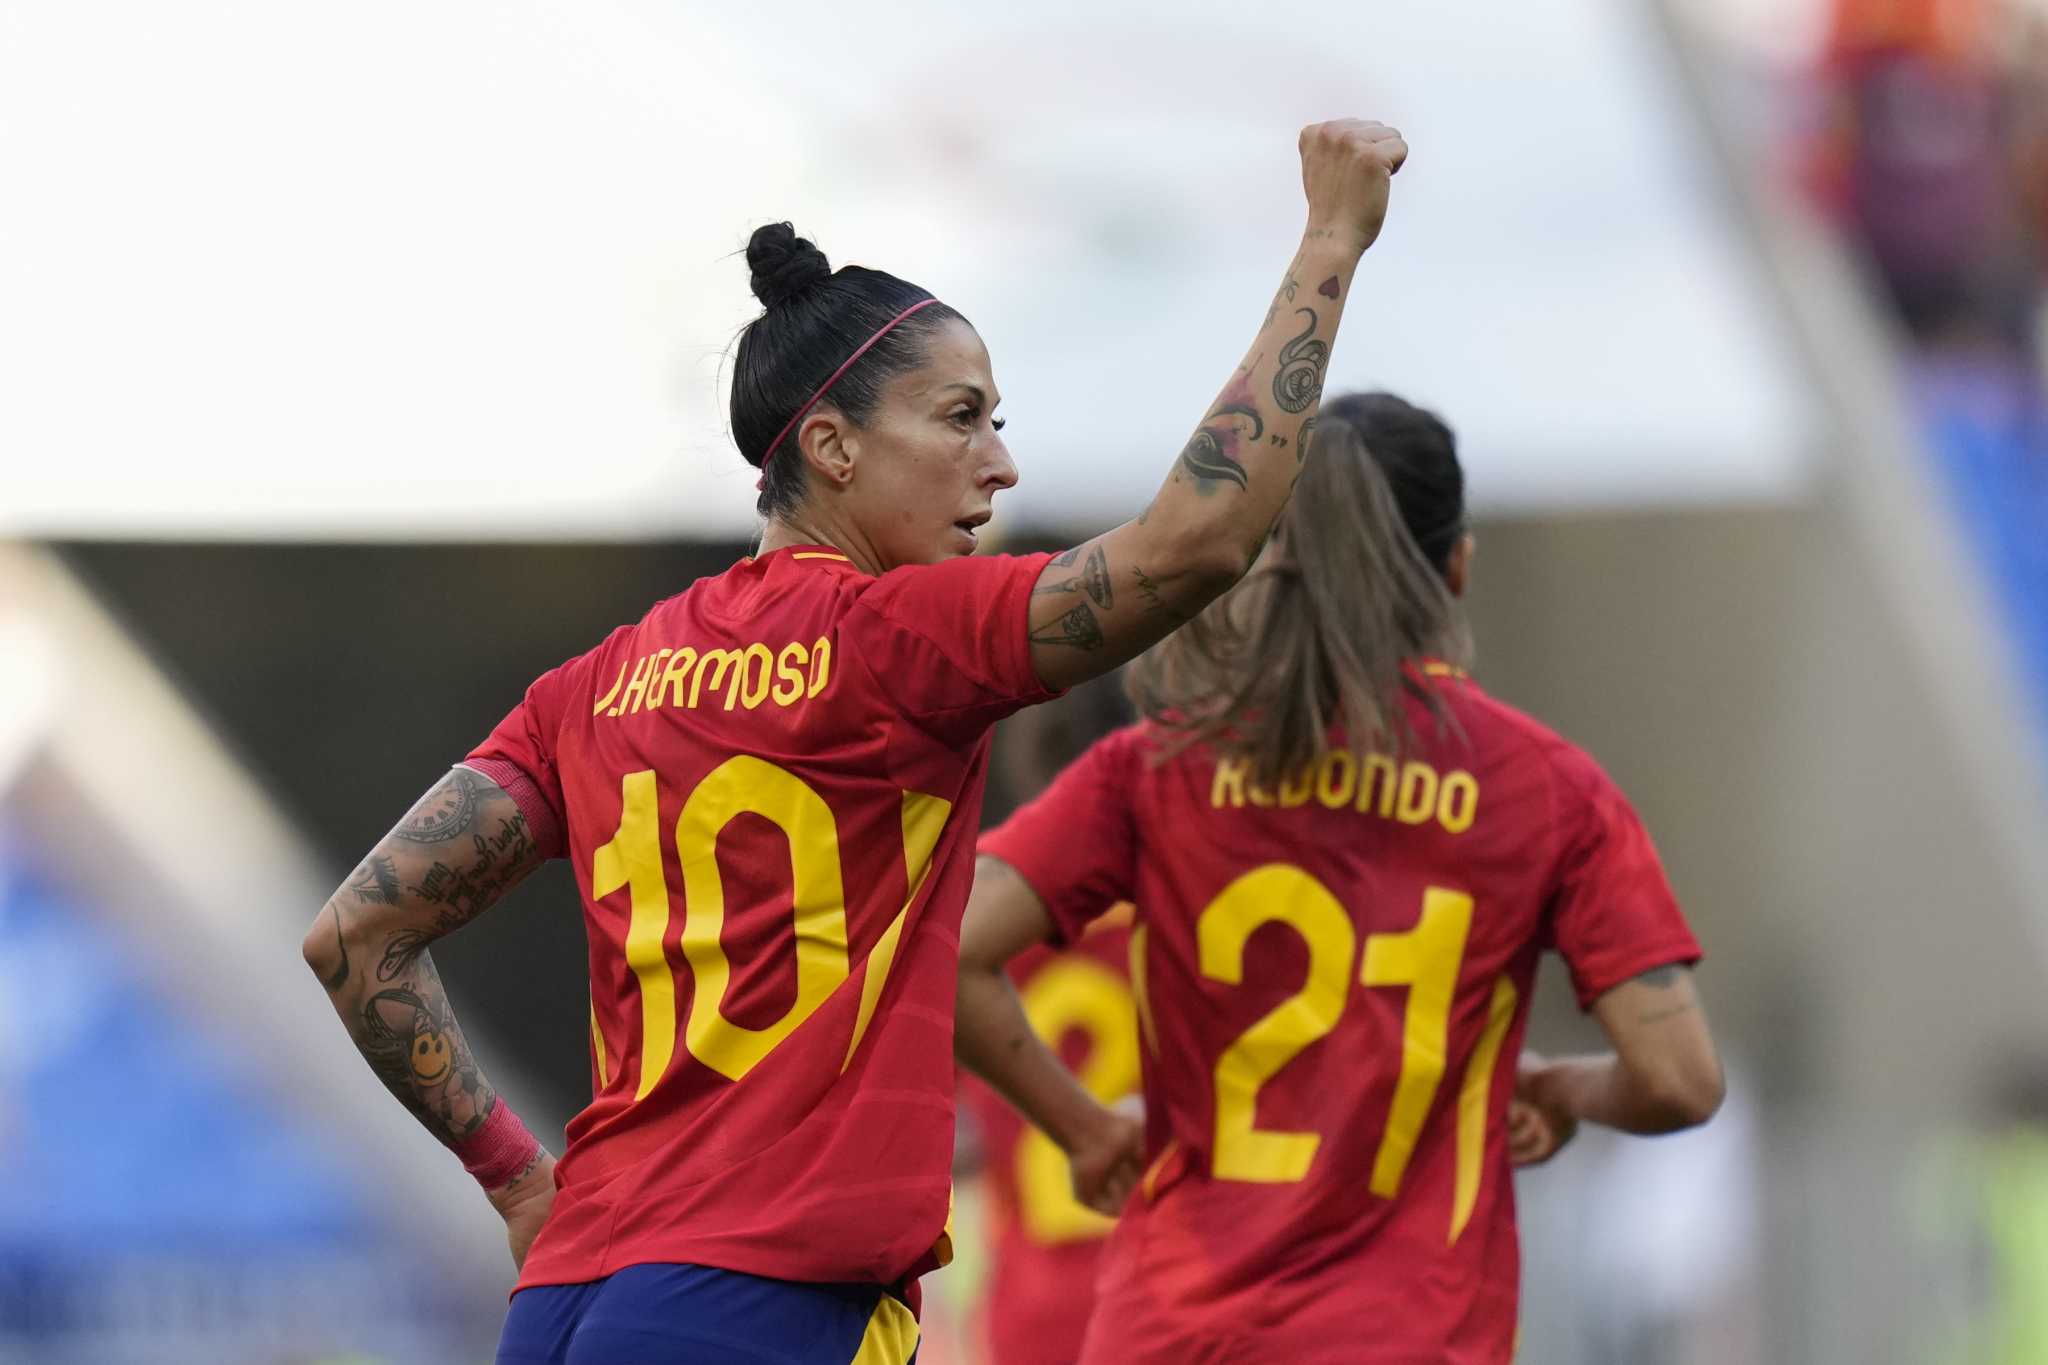 Spain beats Colombia 4-2 on penalties to reach the semifinals in Olympic women's soccer